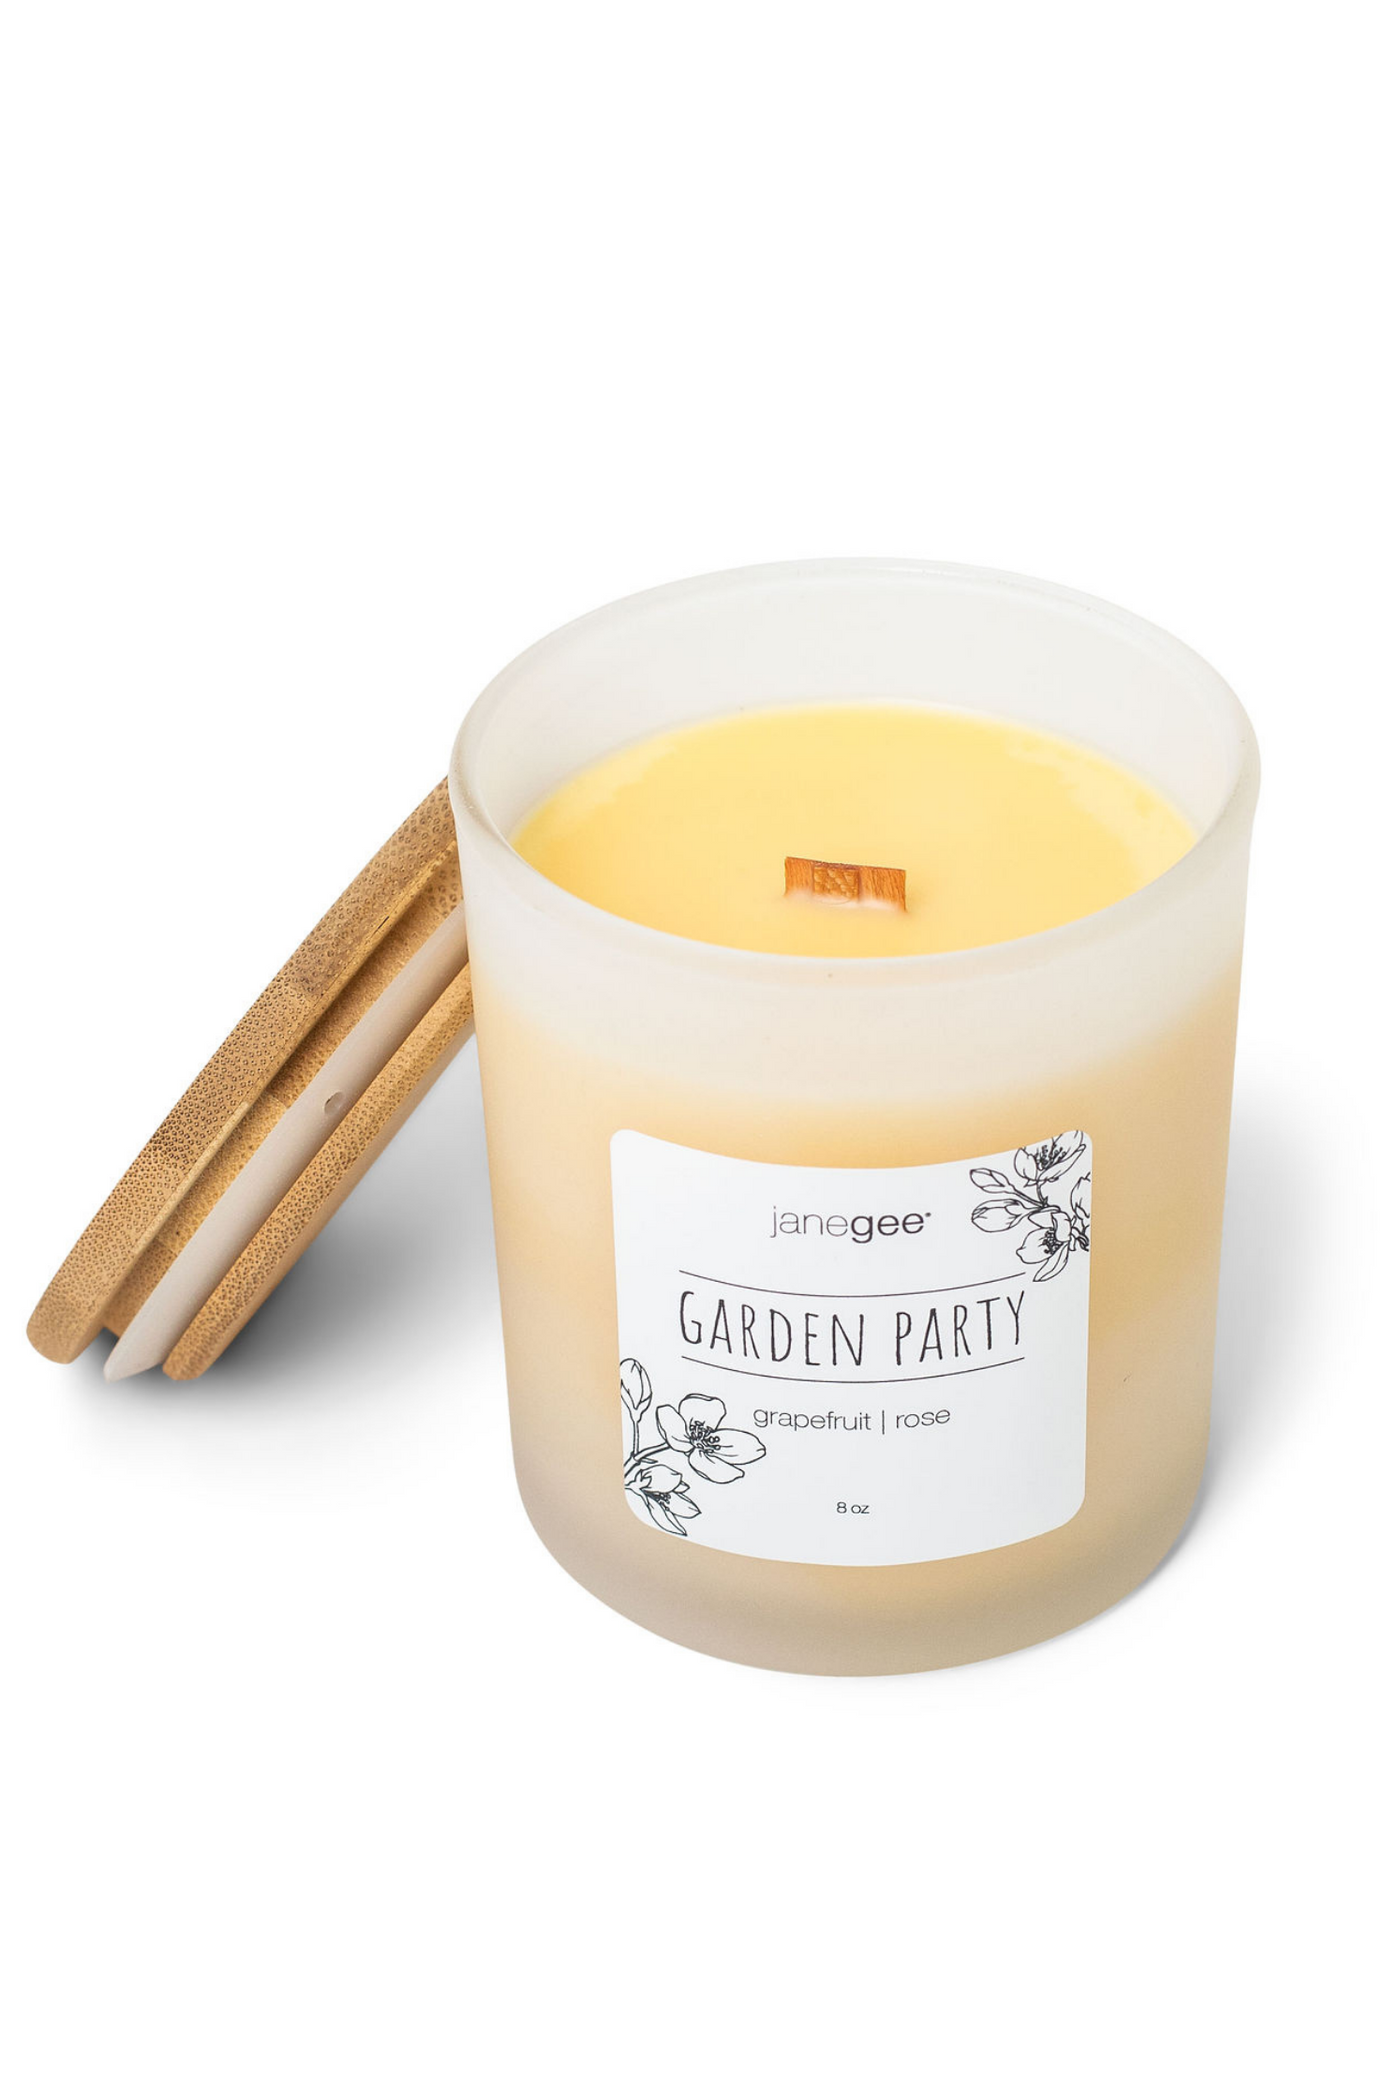 janegee Garden Party Aromatherapy Candle